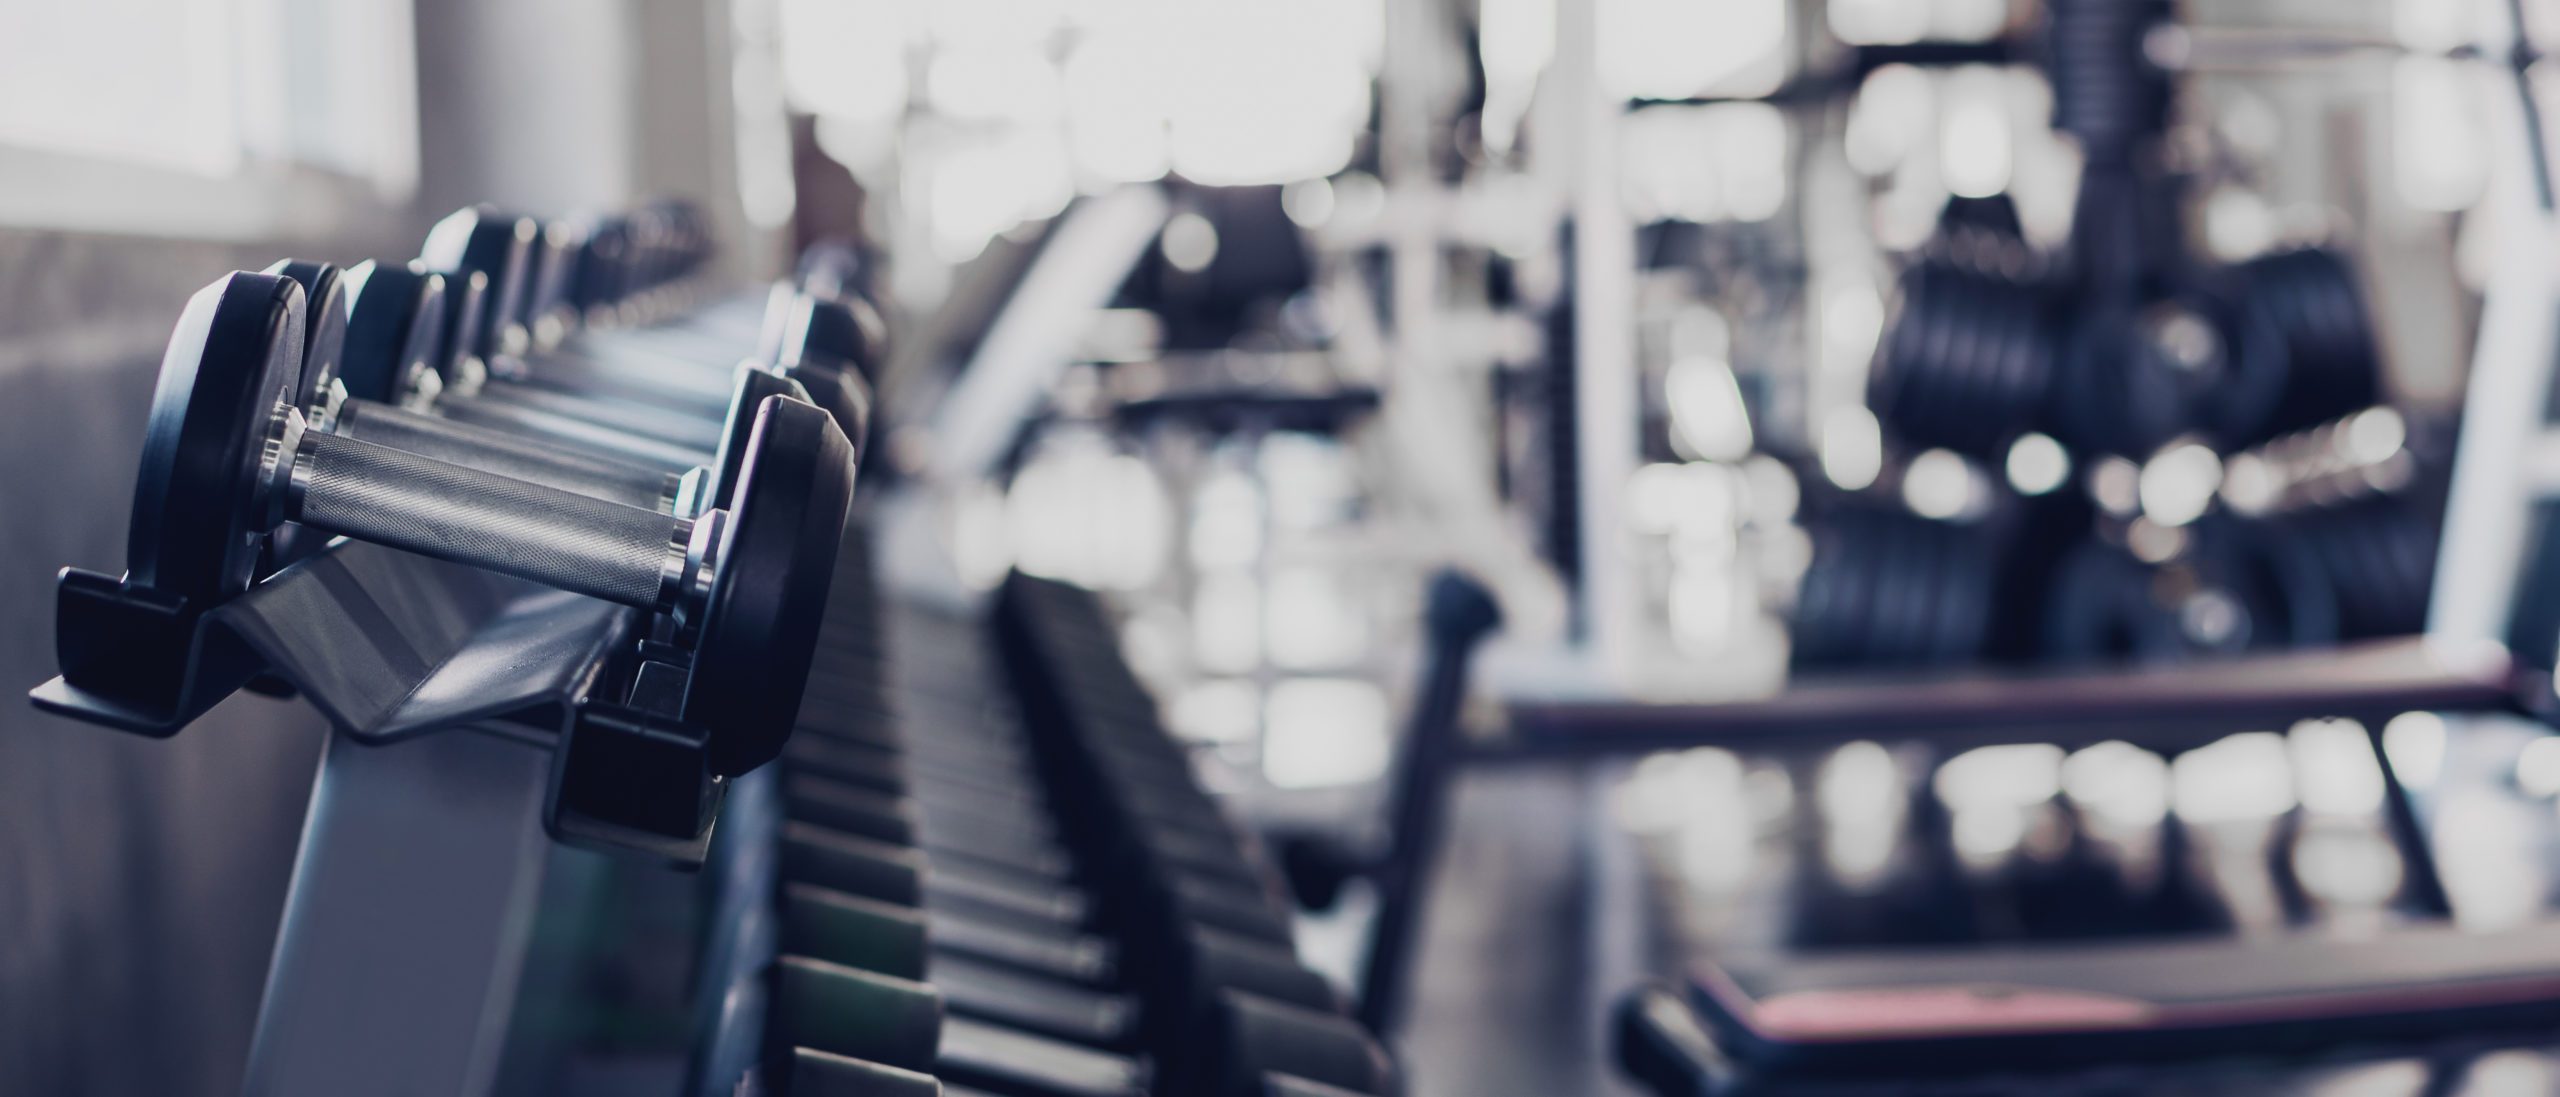 Blog - gym interior background of dumbbells on rack in fitness and workout